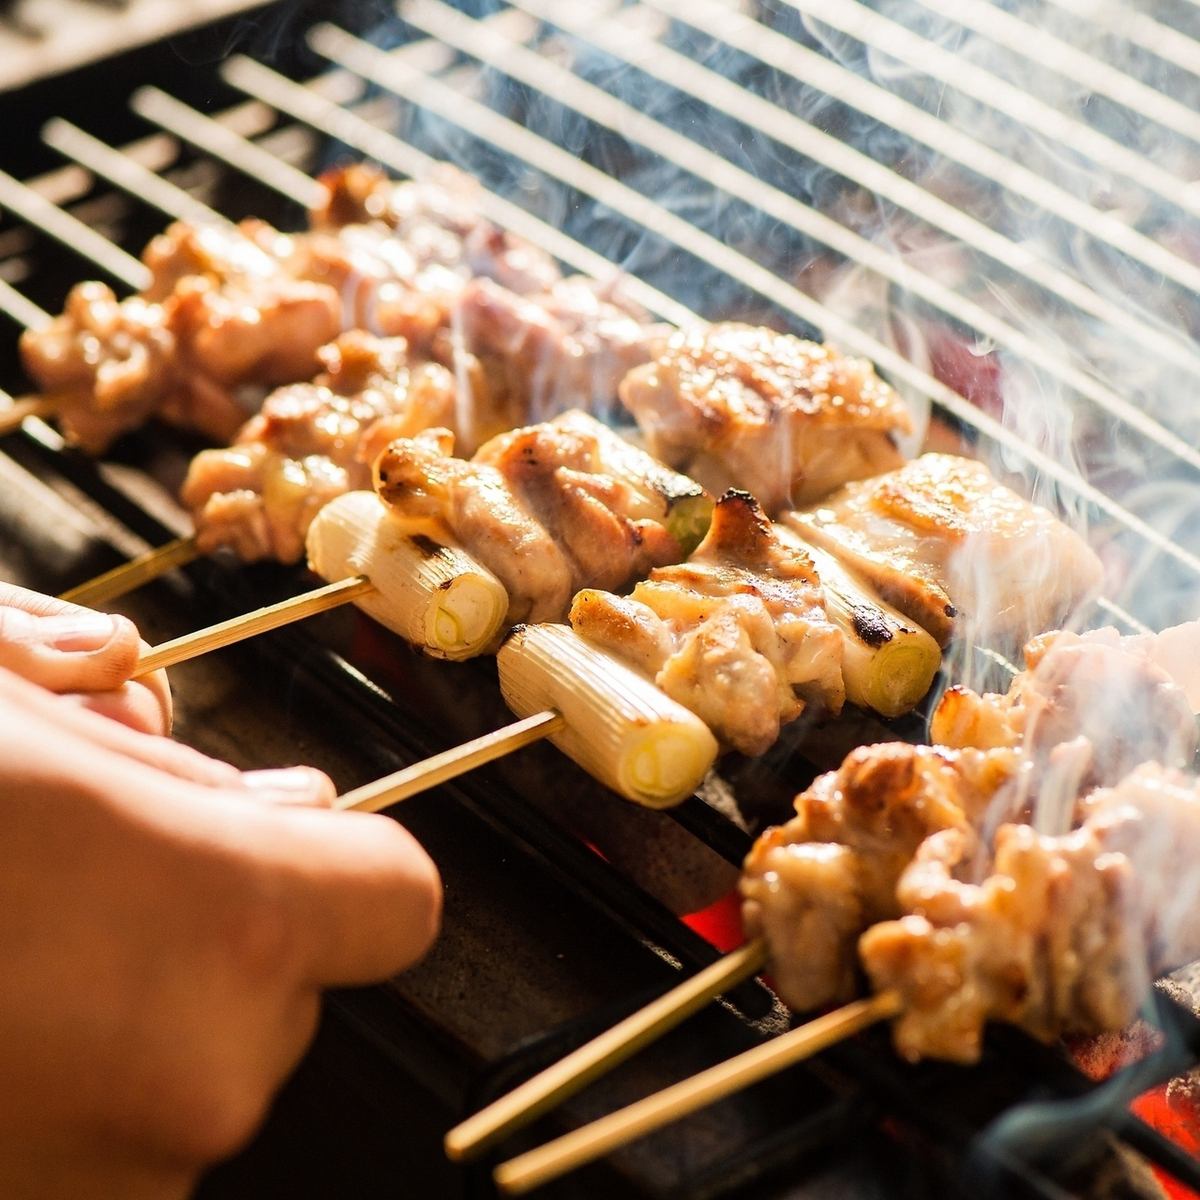 All-you-can-eat charcoal grilled yakitori at a great price!